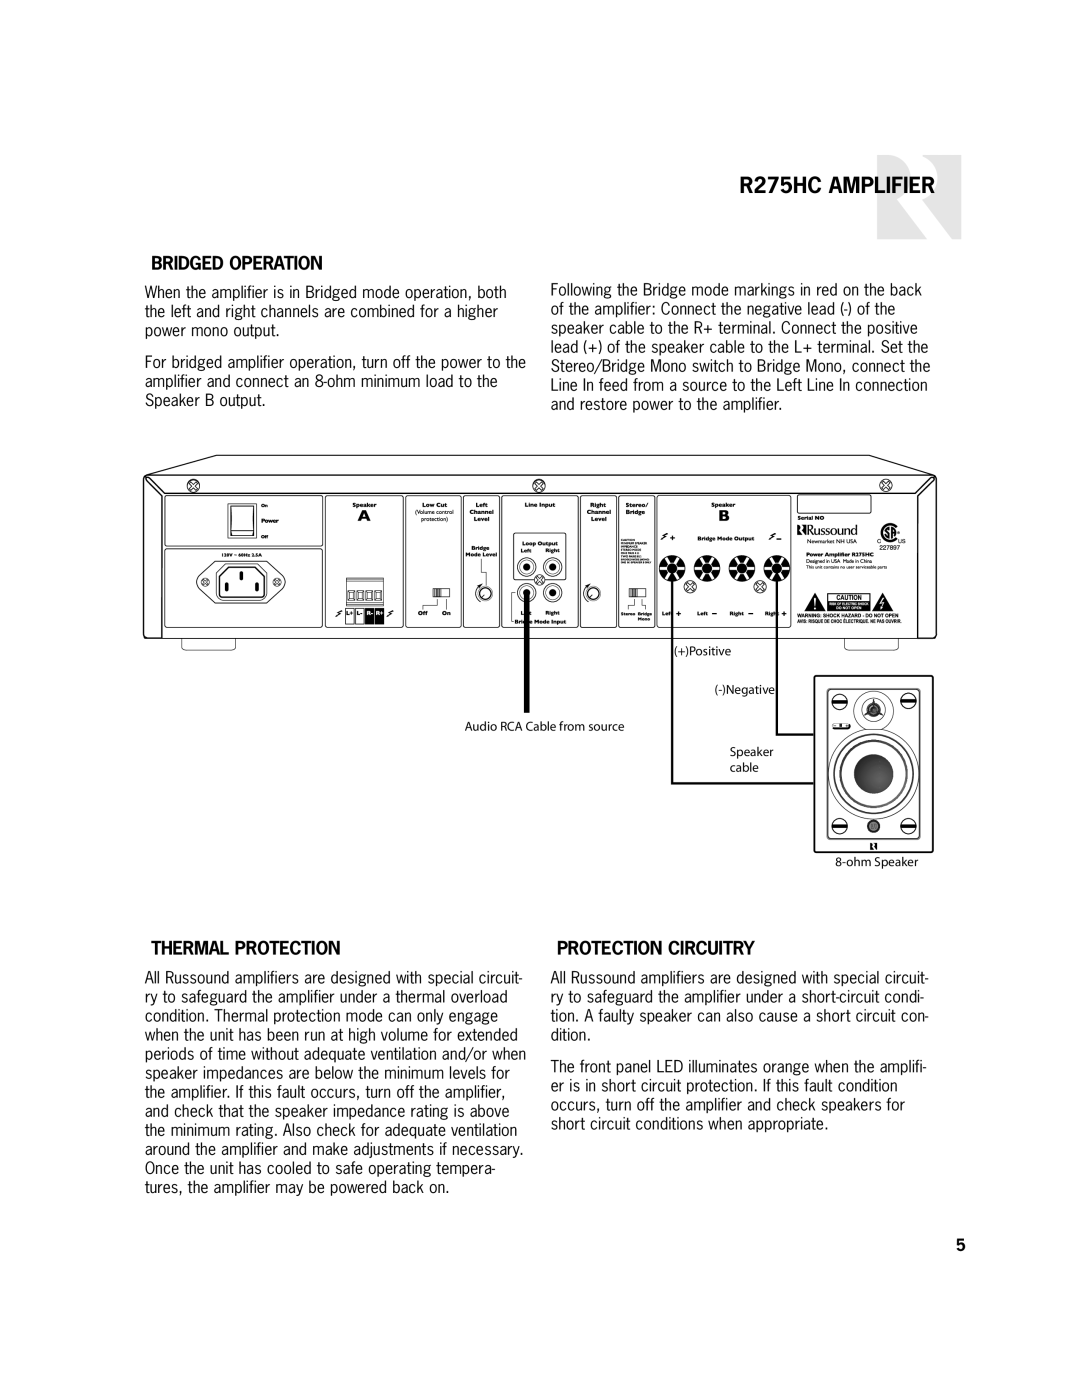 Russound user manual Bridged Operation, Thermal Protection, R275HC AMPLIFIER, Protection Circuitry 